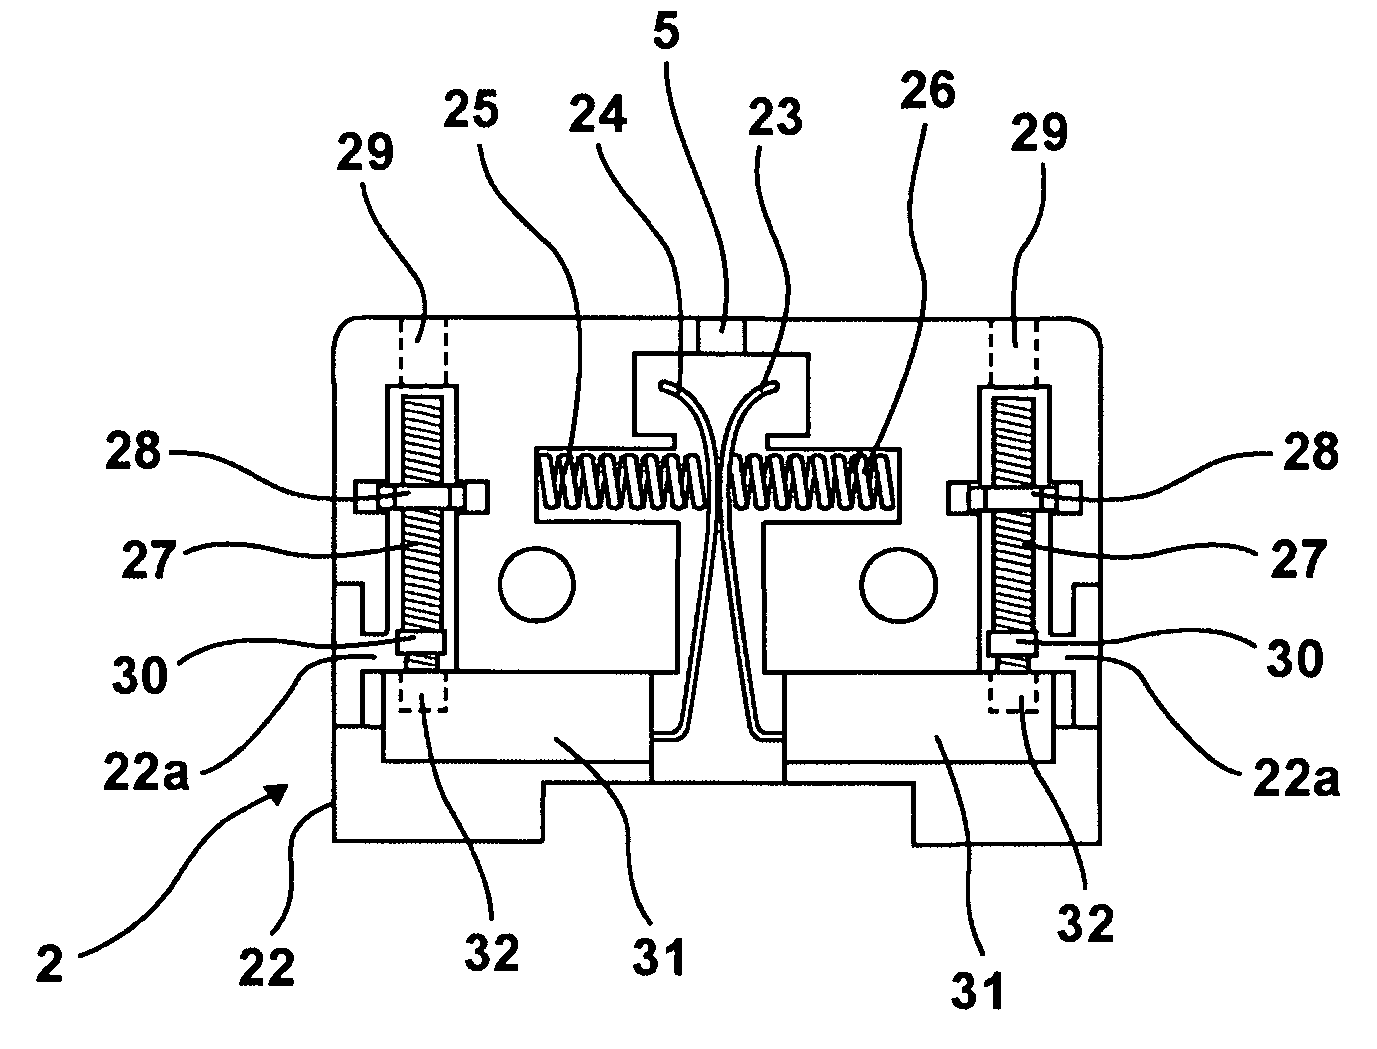 Apparatus for testing a protective measuring or metering device as a constituent part of a high or medium voltage installation, more specifically of a utility protective relay, of a generator protective device, of a current meter, or of other protective, measuring or metering electrical devices in a high or medium voltage installation